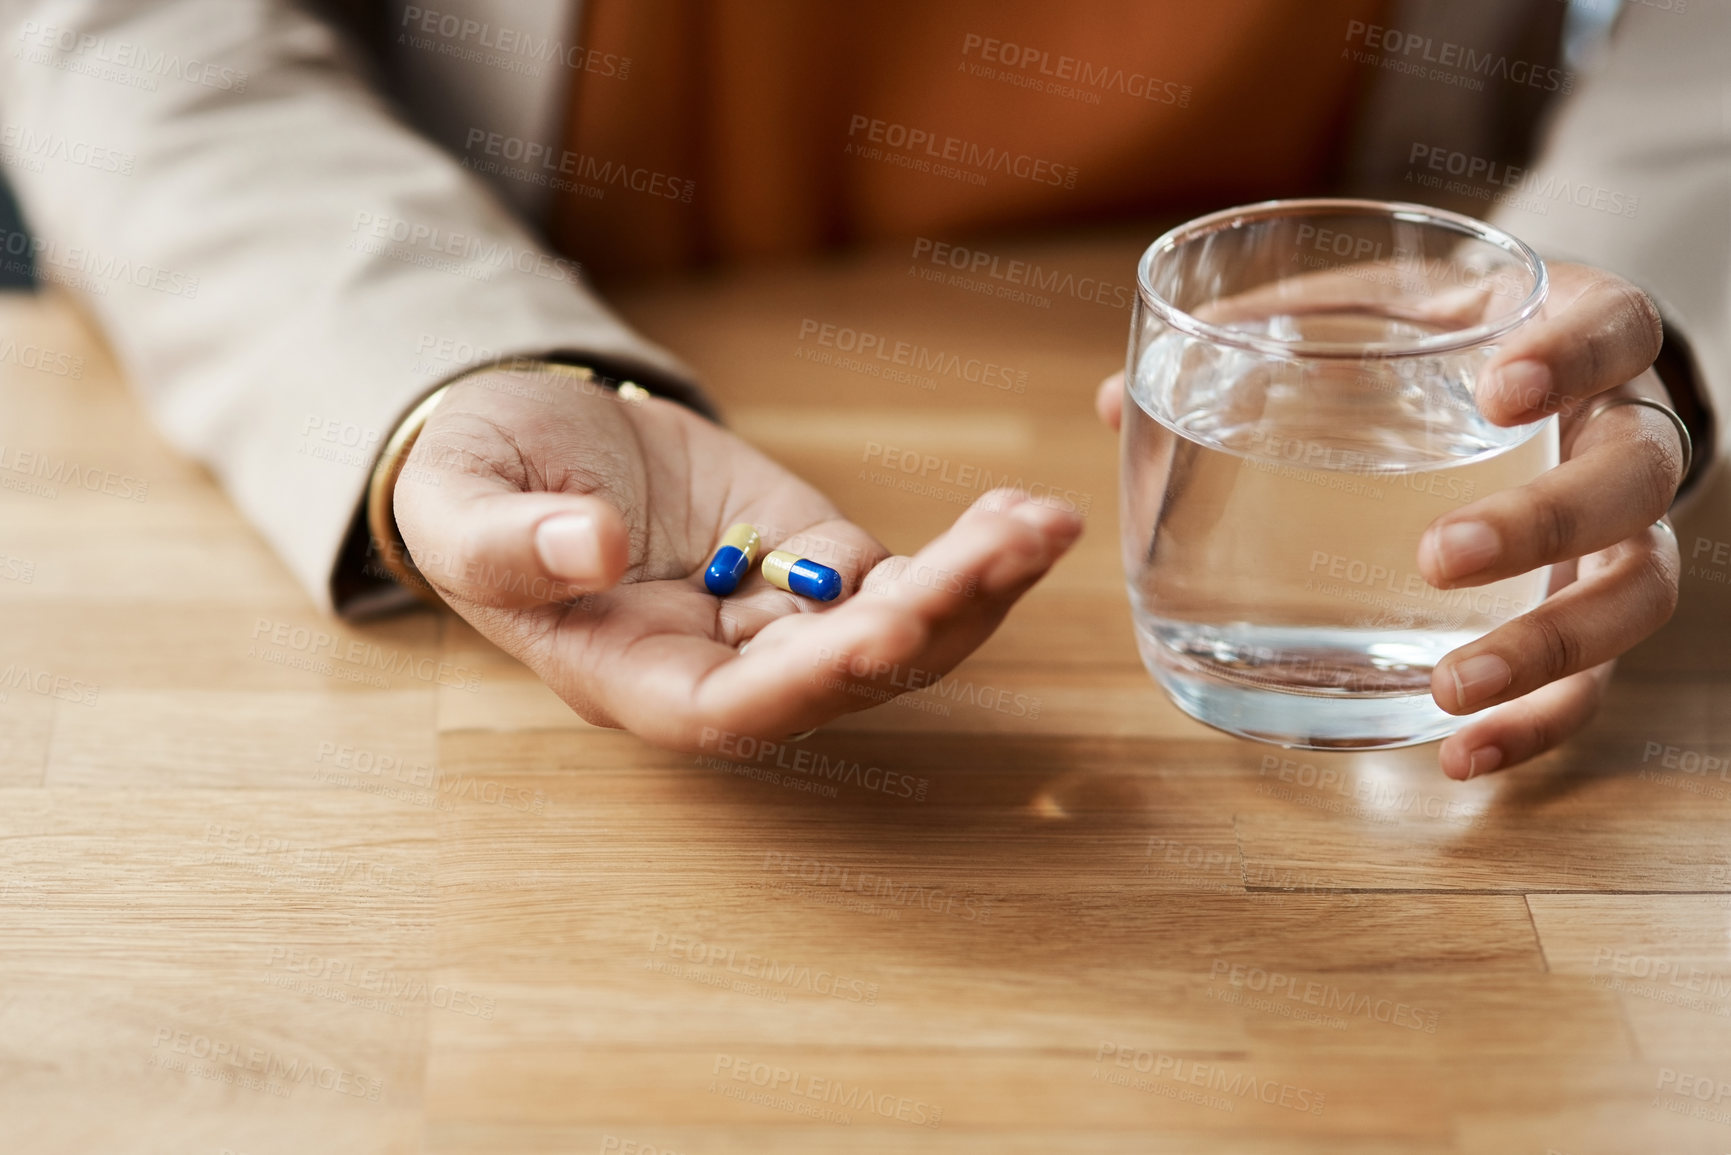 Buy stock photo Cropped shot of an unrecognizable businesswoman taking pills with a glass of water while in her office